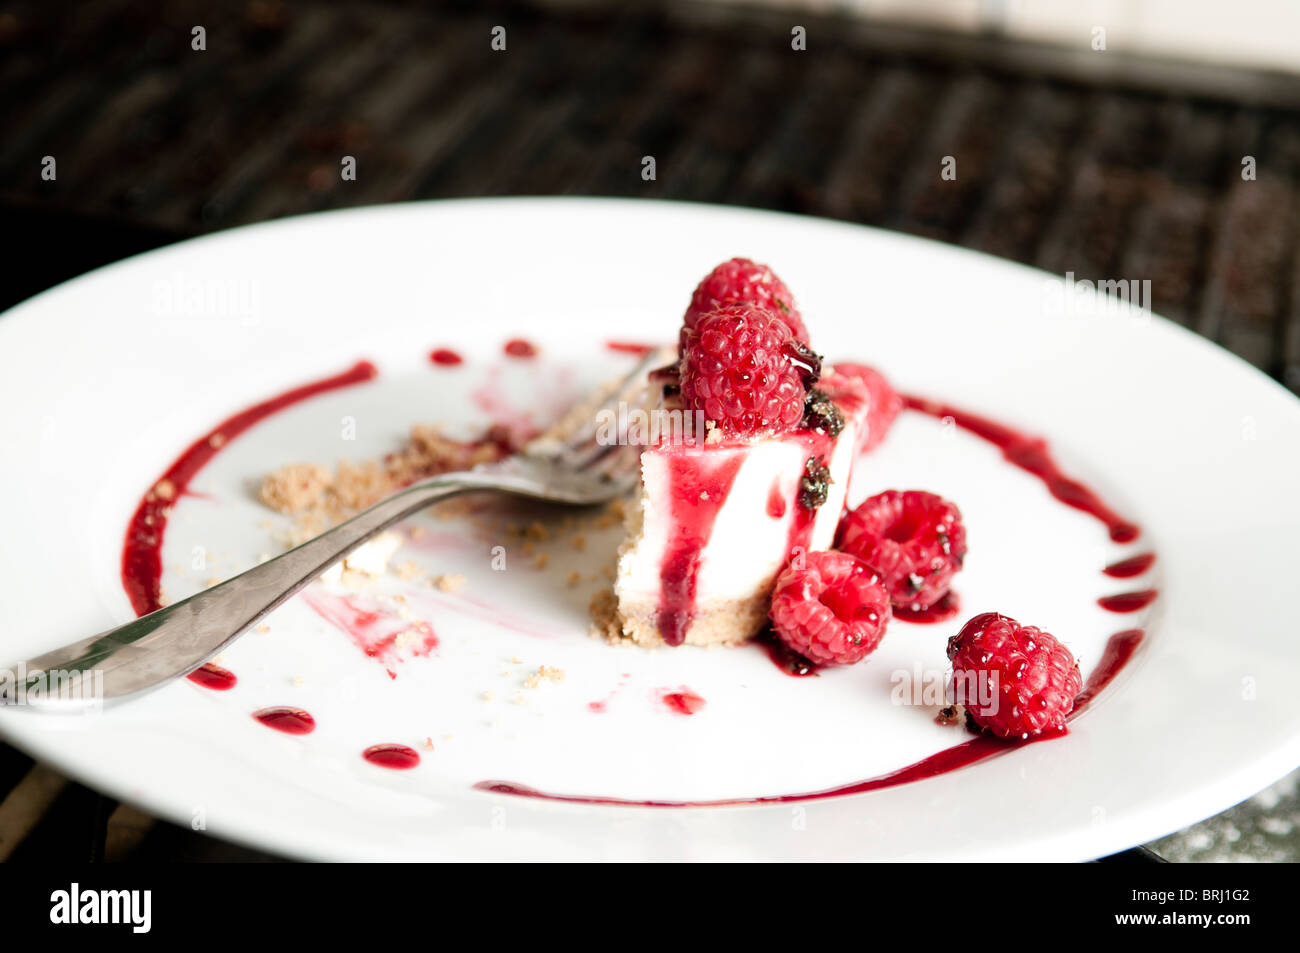 Half eaten raspberry cheesecake on plate with fork Stock Photo